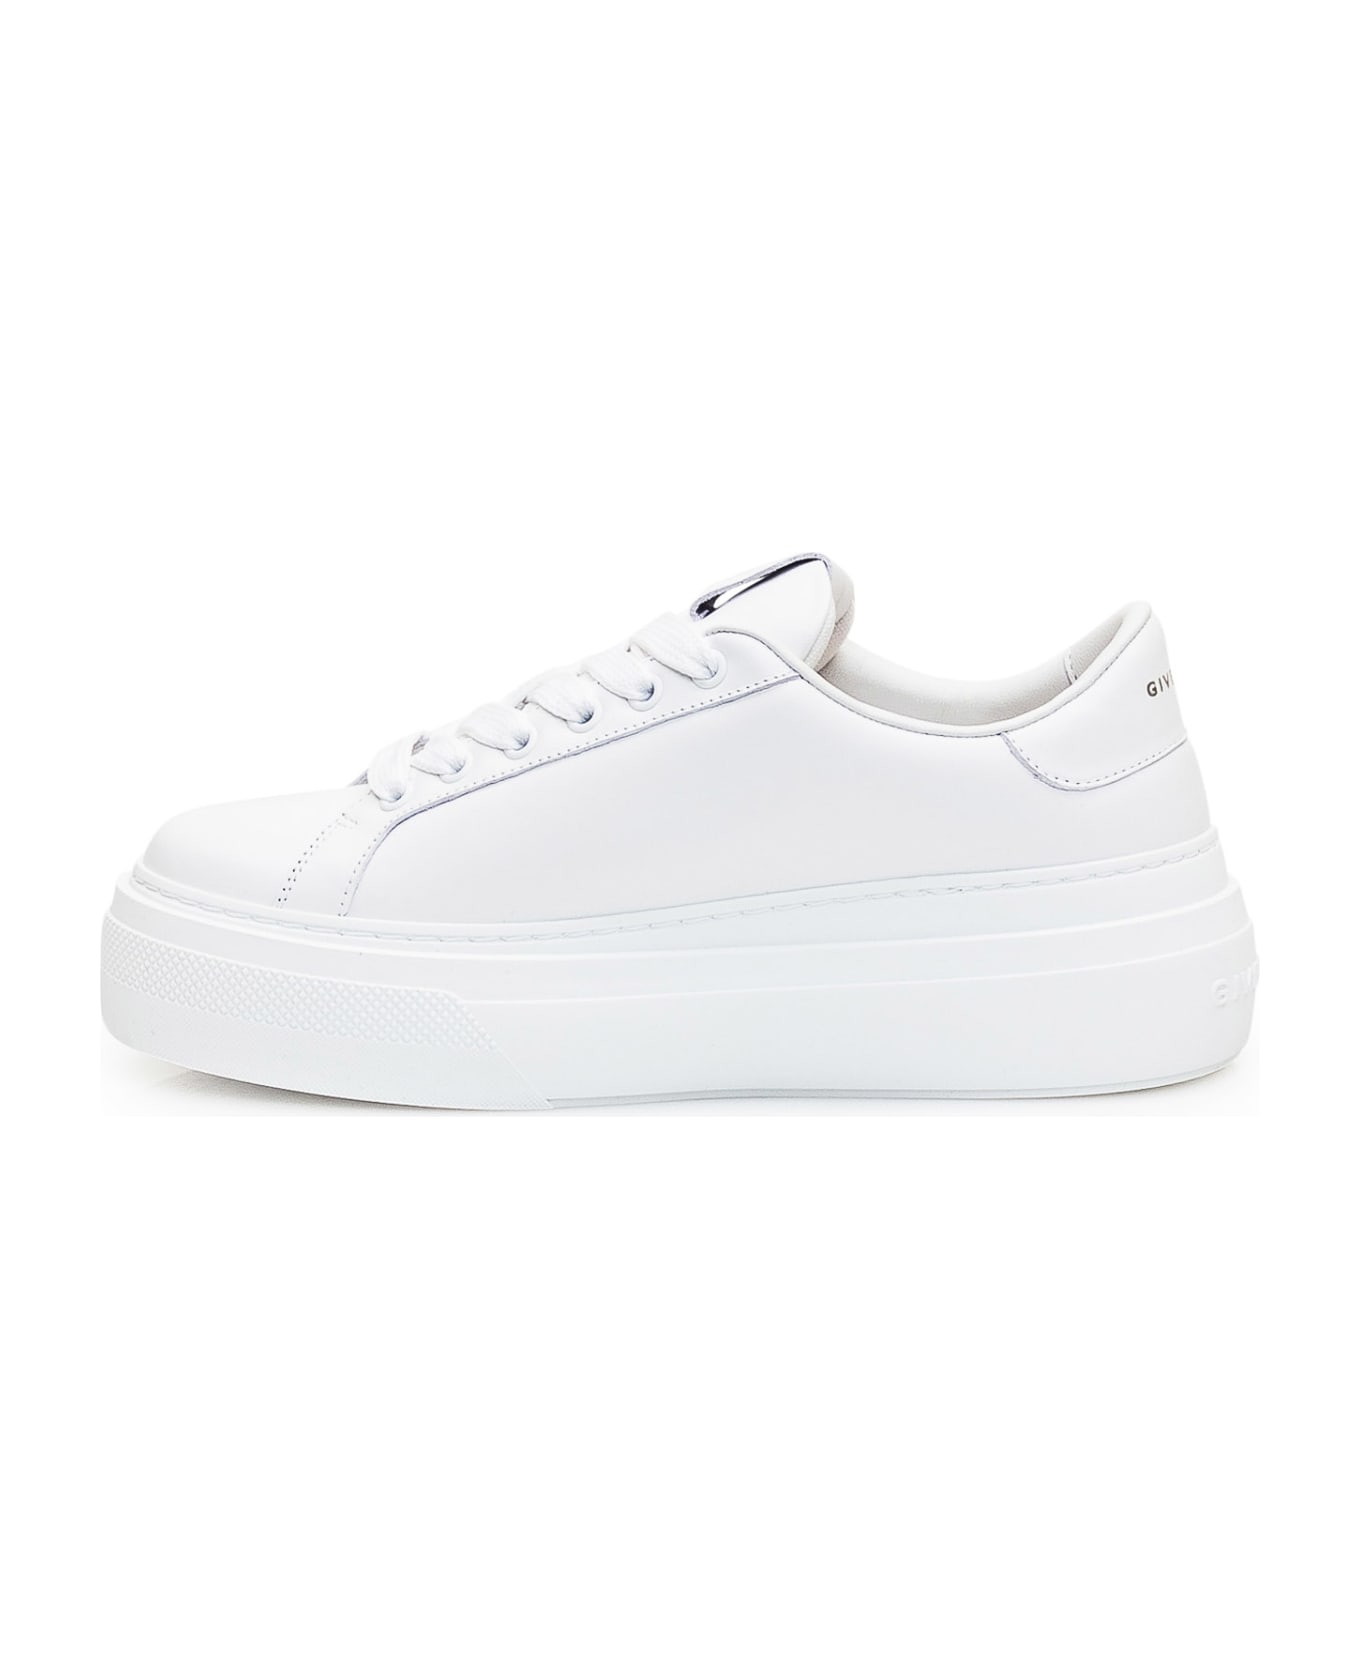 Givenchy City Platform Sneakers - WHITE ウェッジシューズ